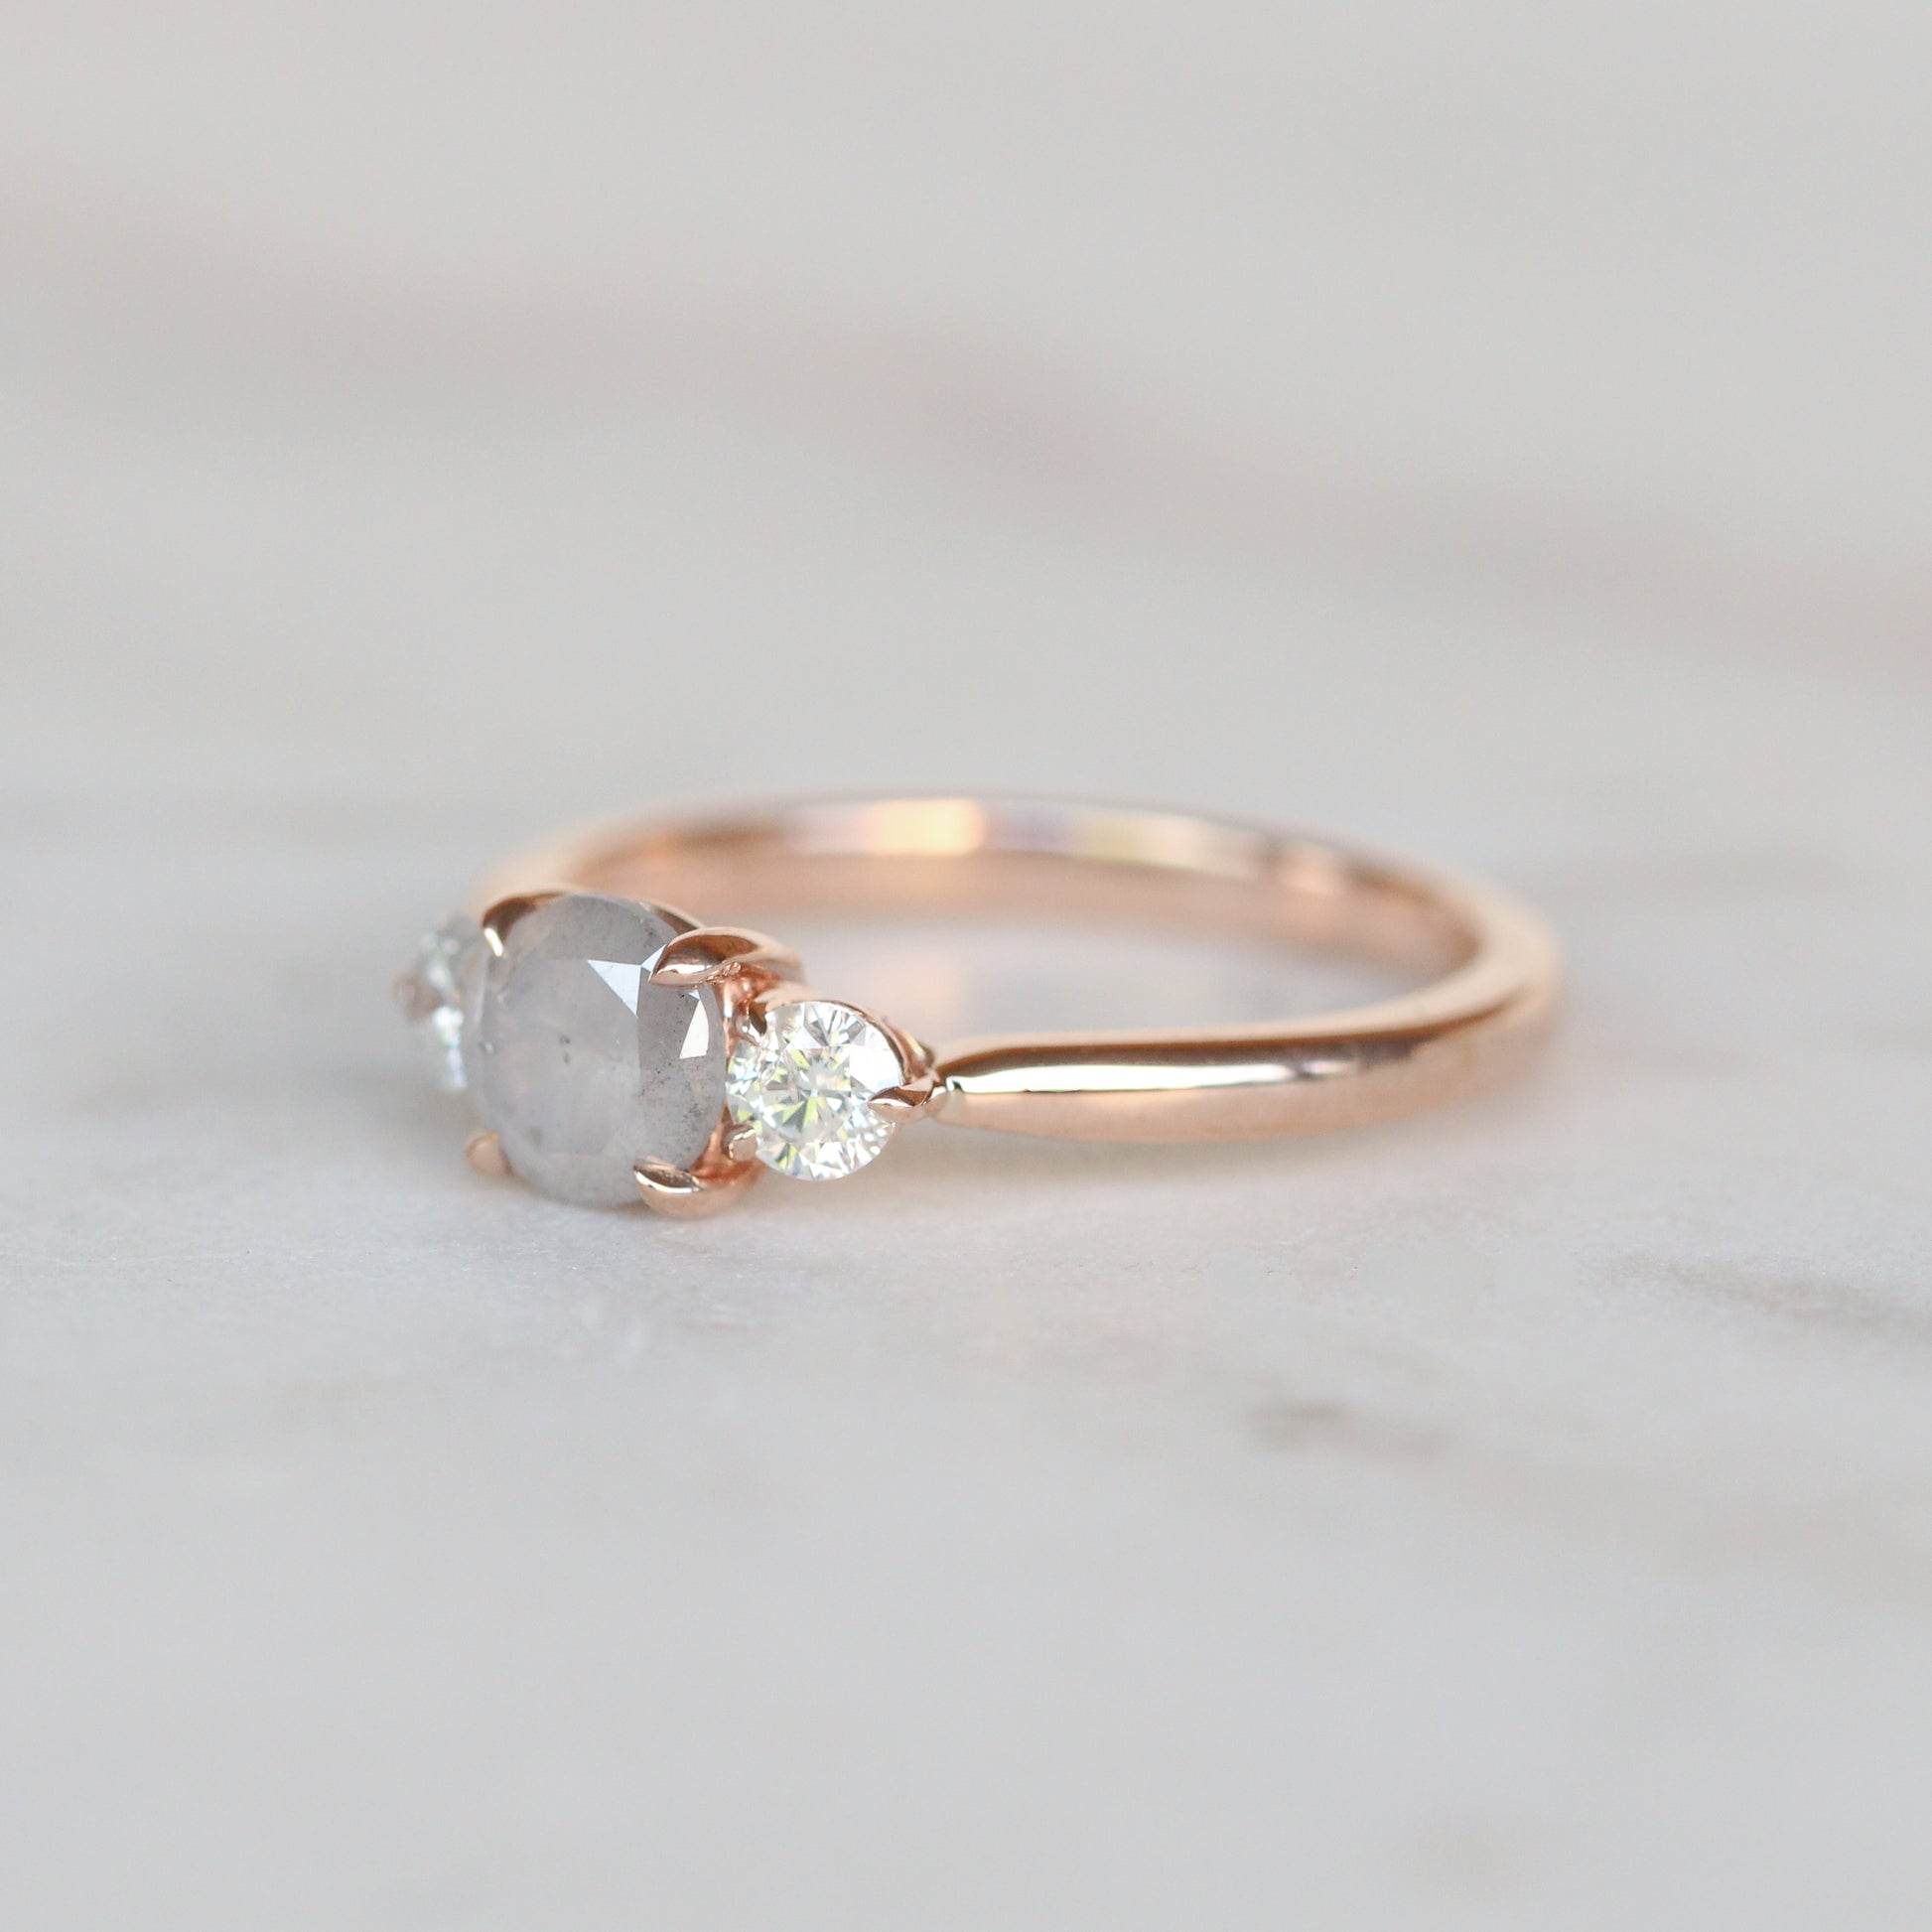 Olive Ring with a 0.88 Carat Misty Gray Diamond with White Diamond Accents in 10k Rose Gold - Ready to Size and Ship - Midwinter Co. Alternative Bridal Rings and Modern Fine Jewelry